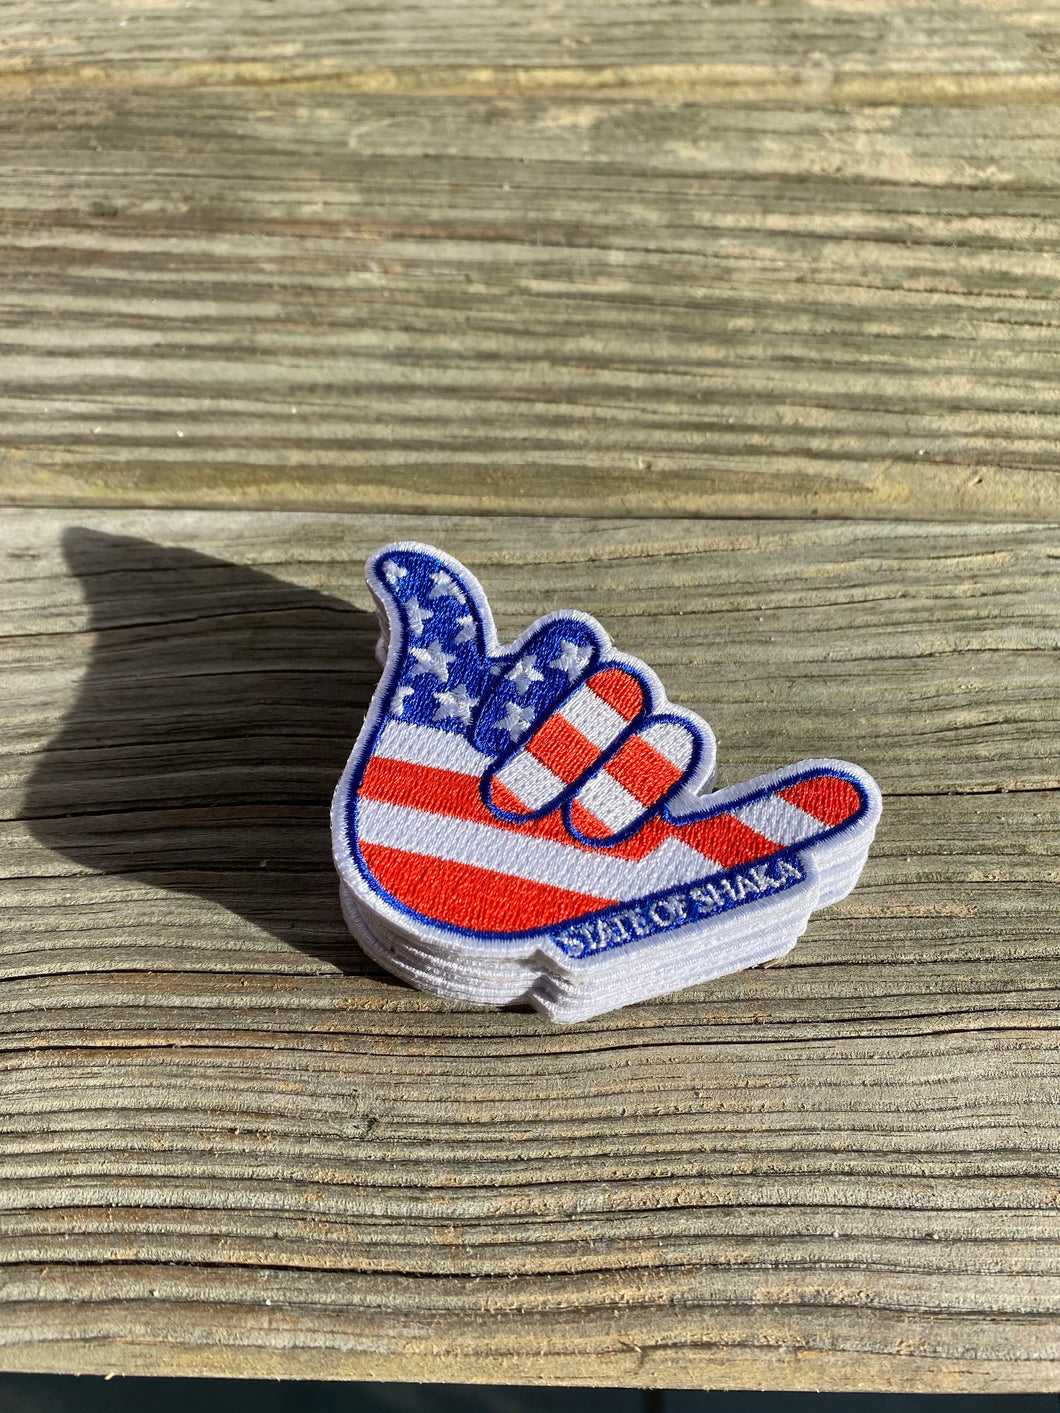 Shaka in the USA Patch